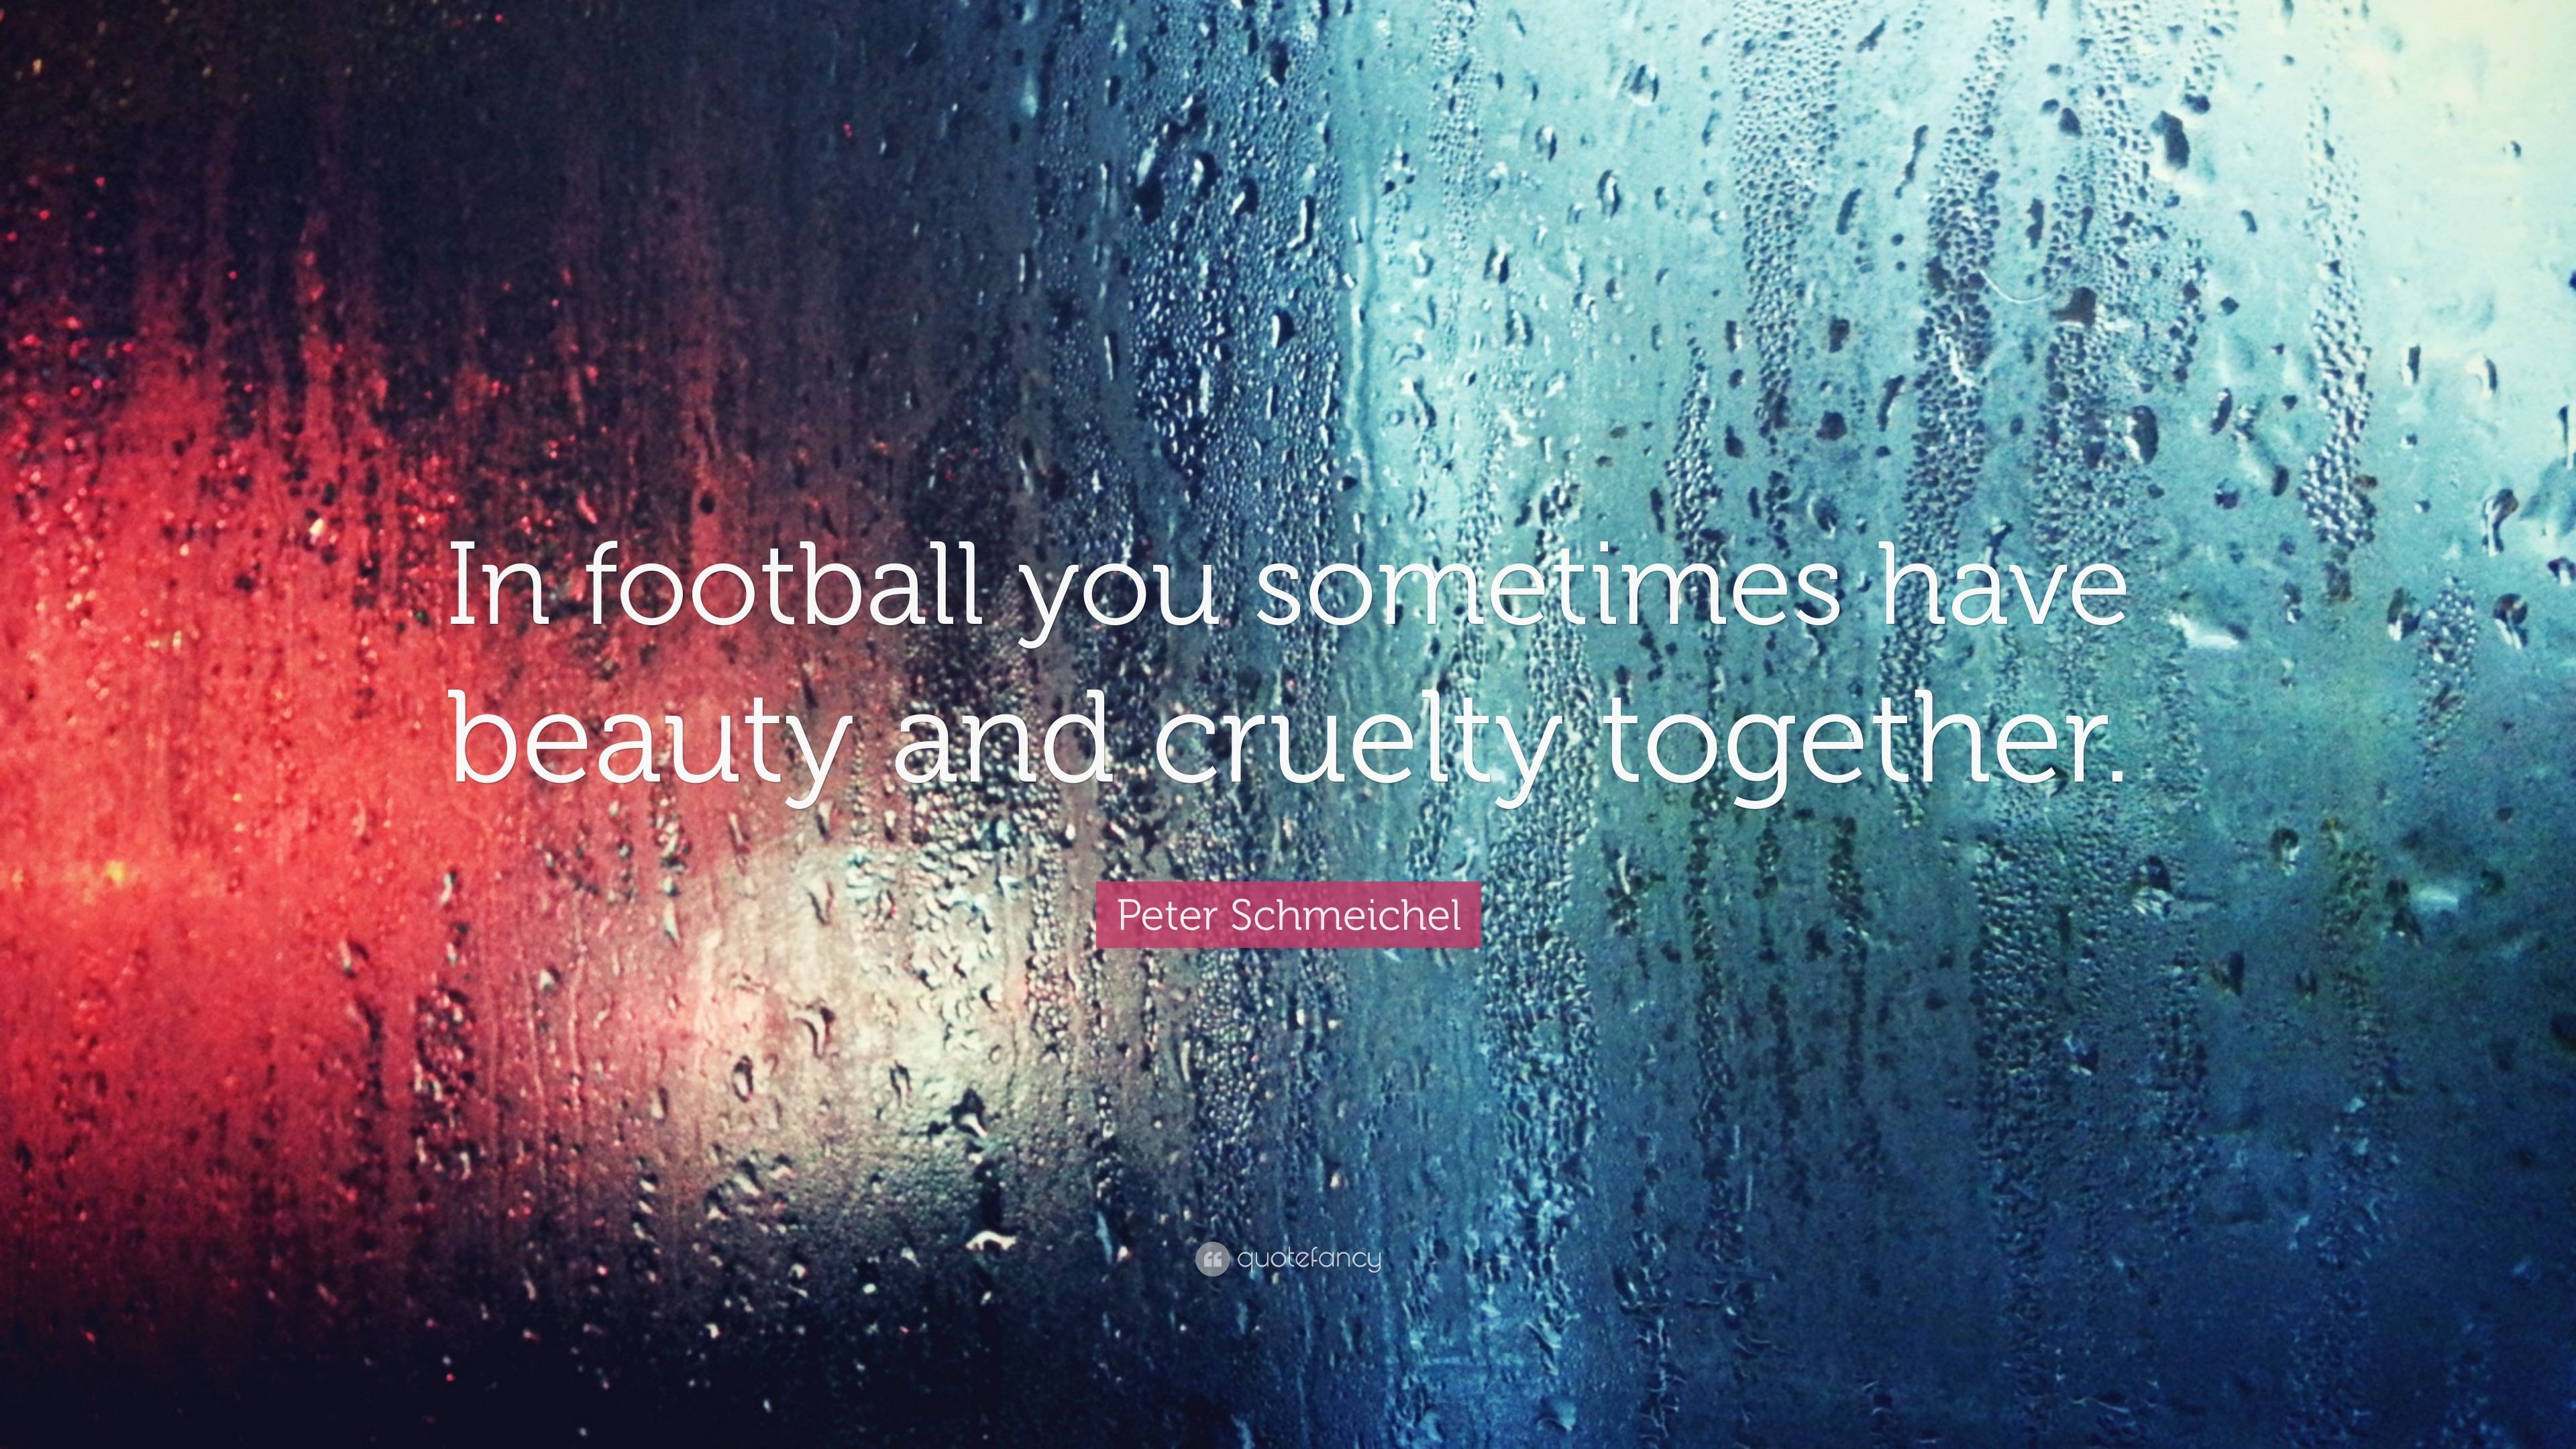 Peter Schmeichel Quote: “In football you sometimes have beauty